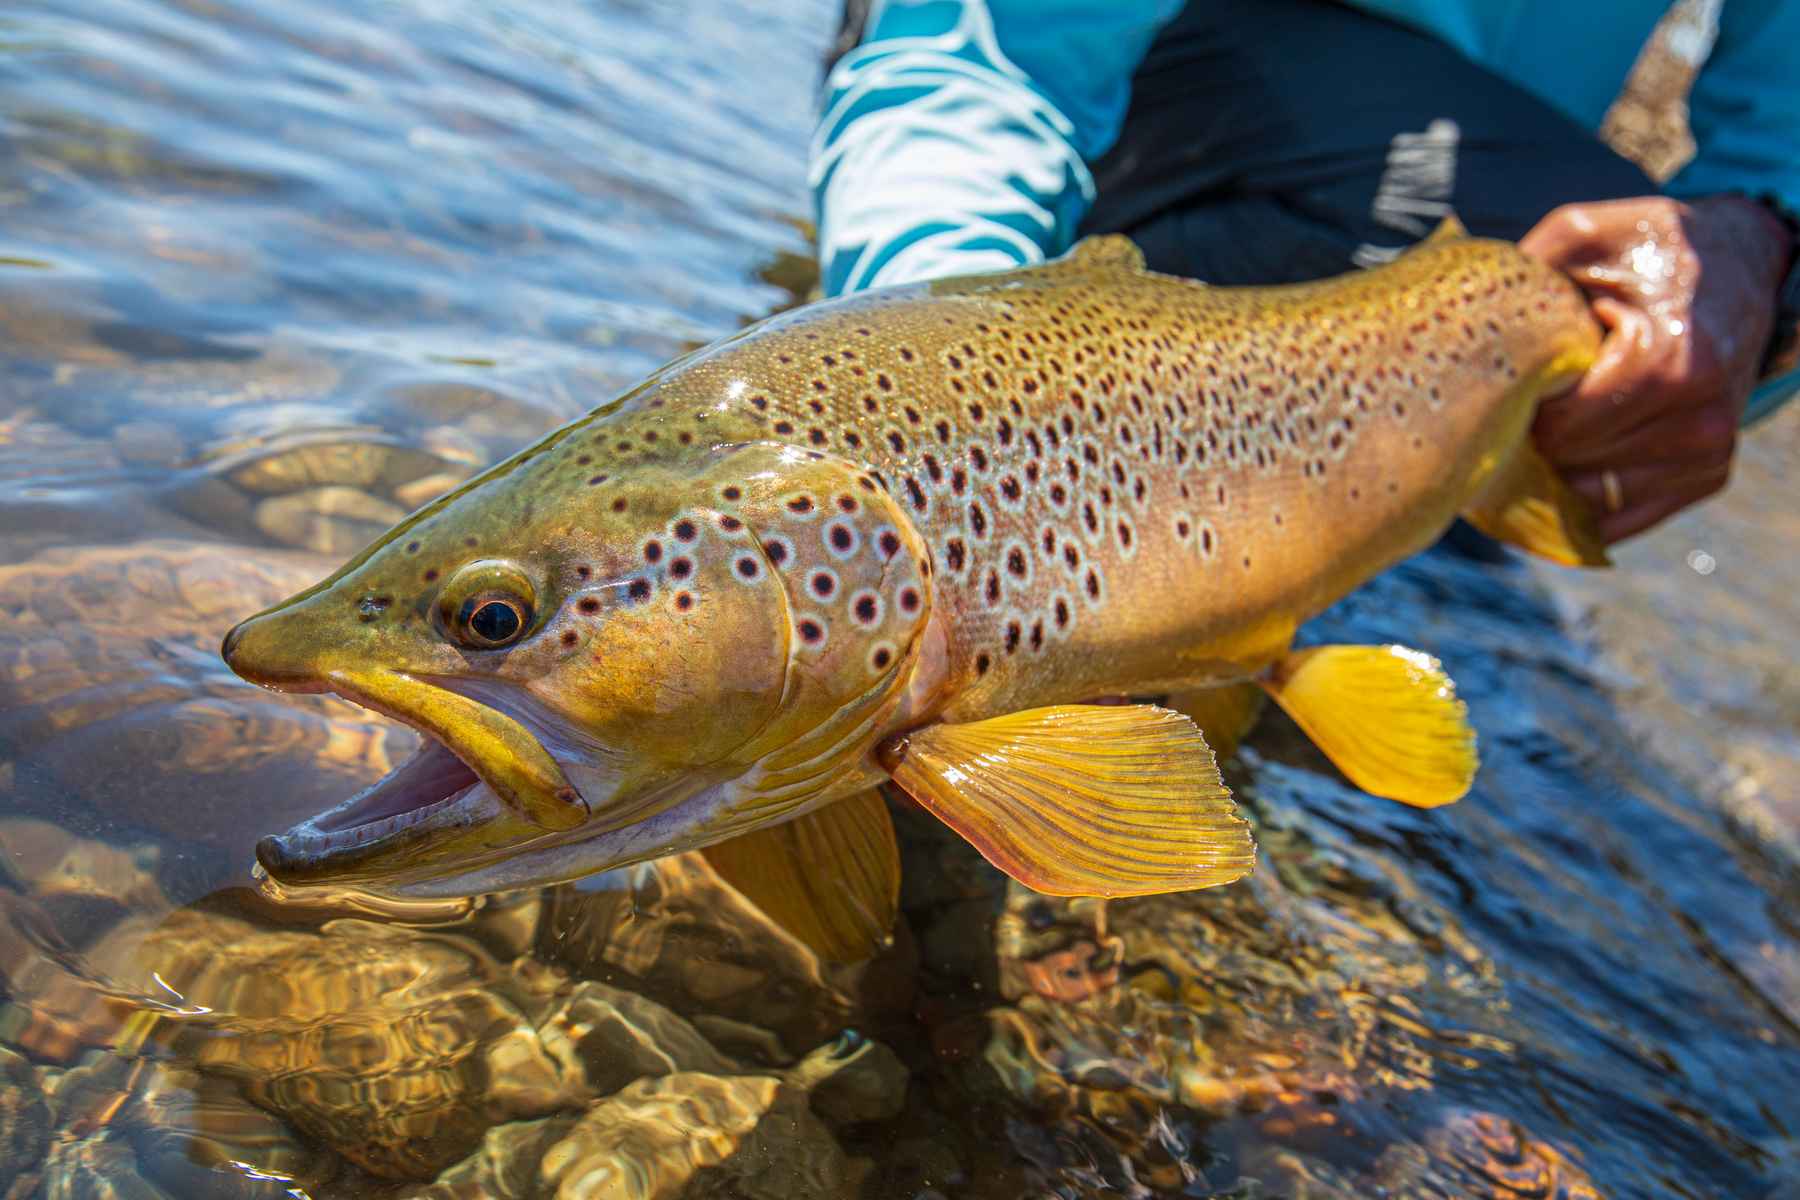 http://www.hatchmag.com/sites/default/files/styles/extra-large/public/field/image/CJ553A2284.jpg